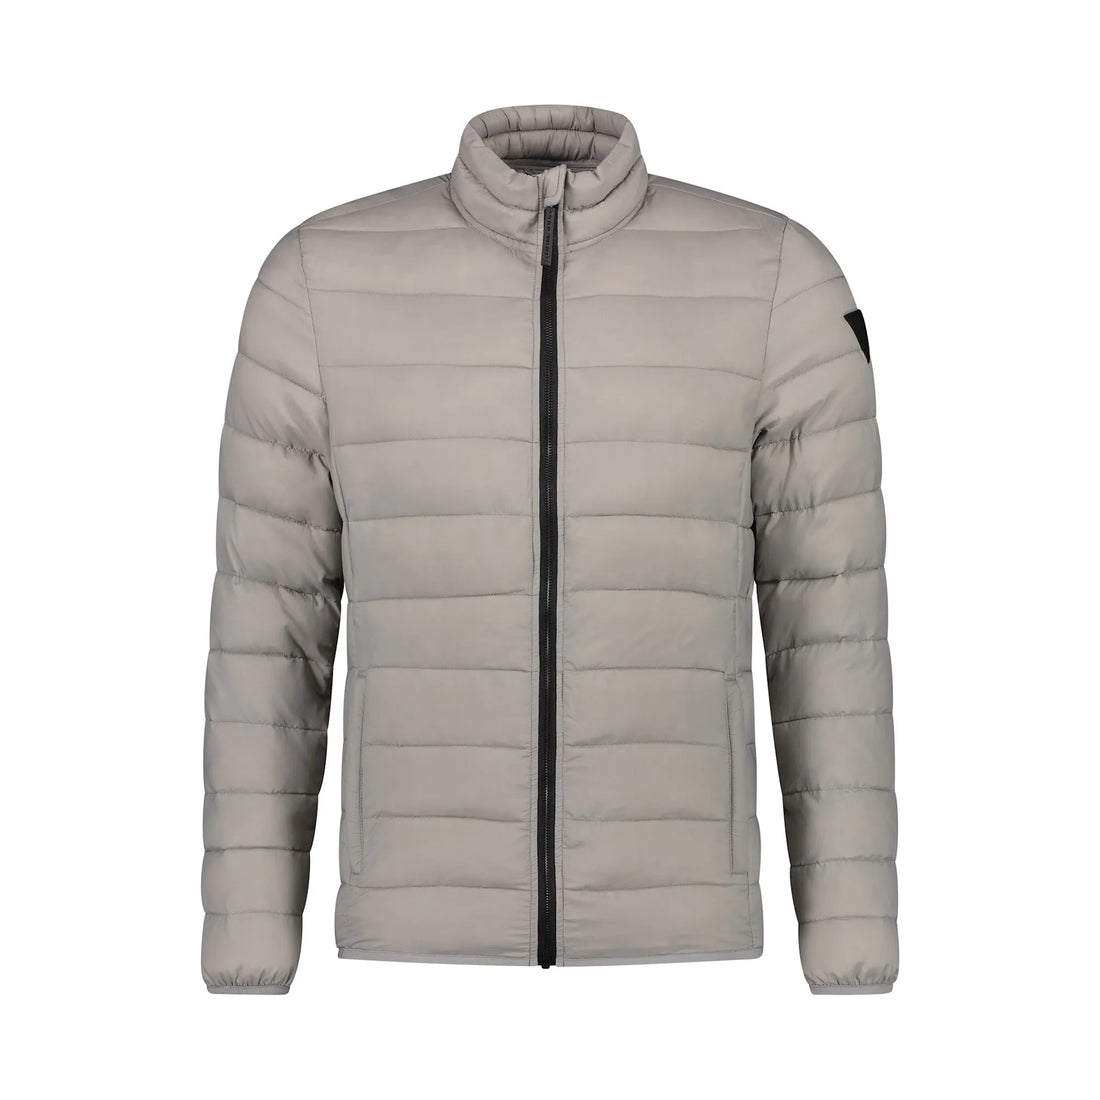 Light weight padded jacket with straight stitching